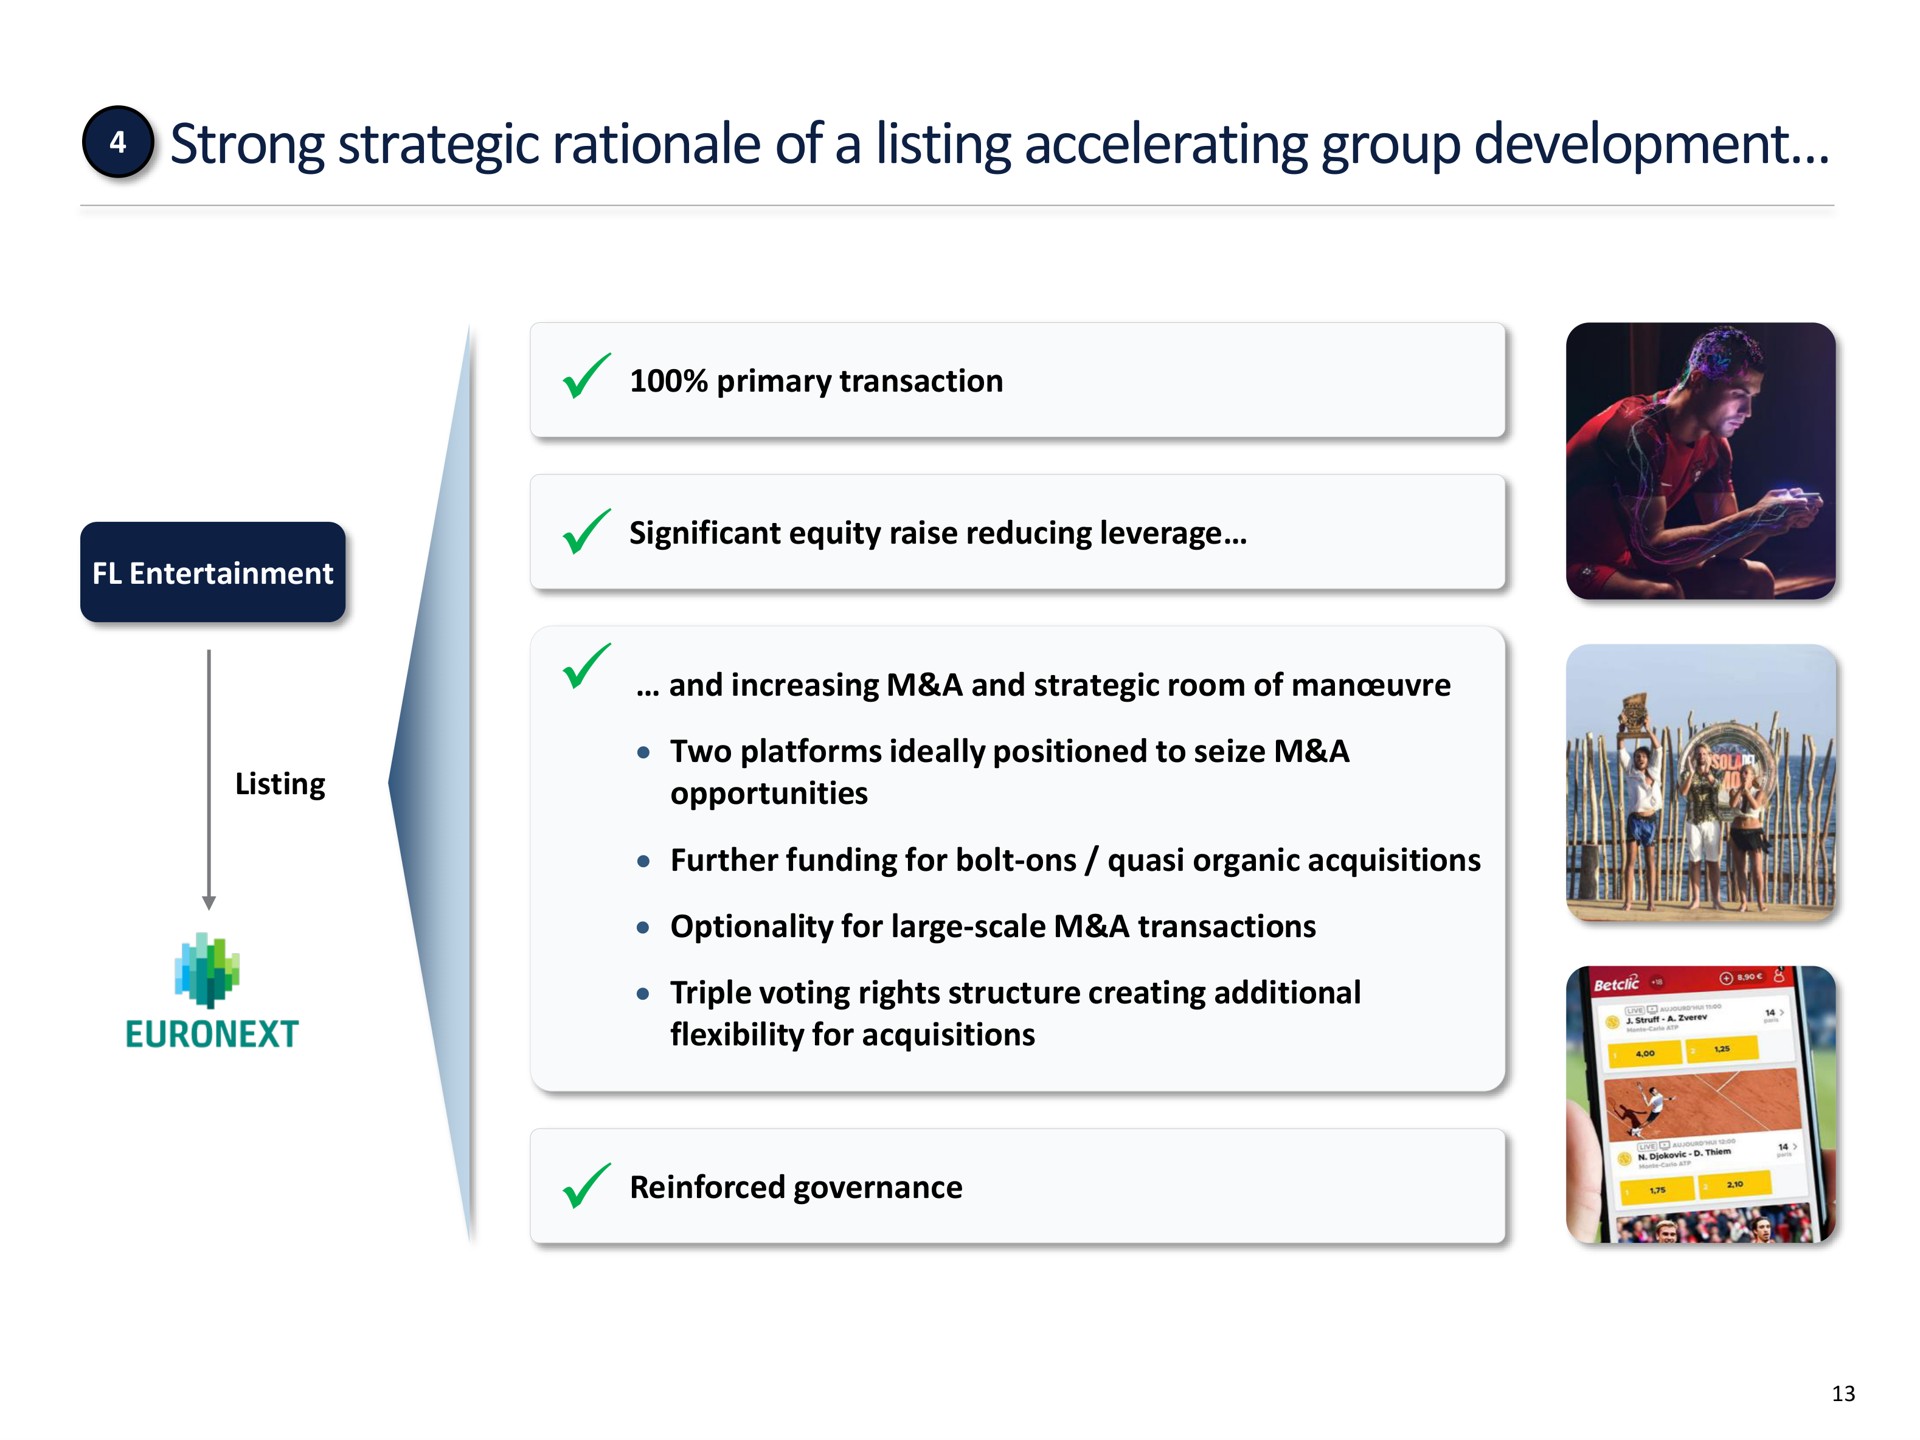 strong strategic rationale of a listing accelerating group development | FL Entertaiment